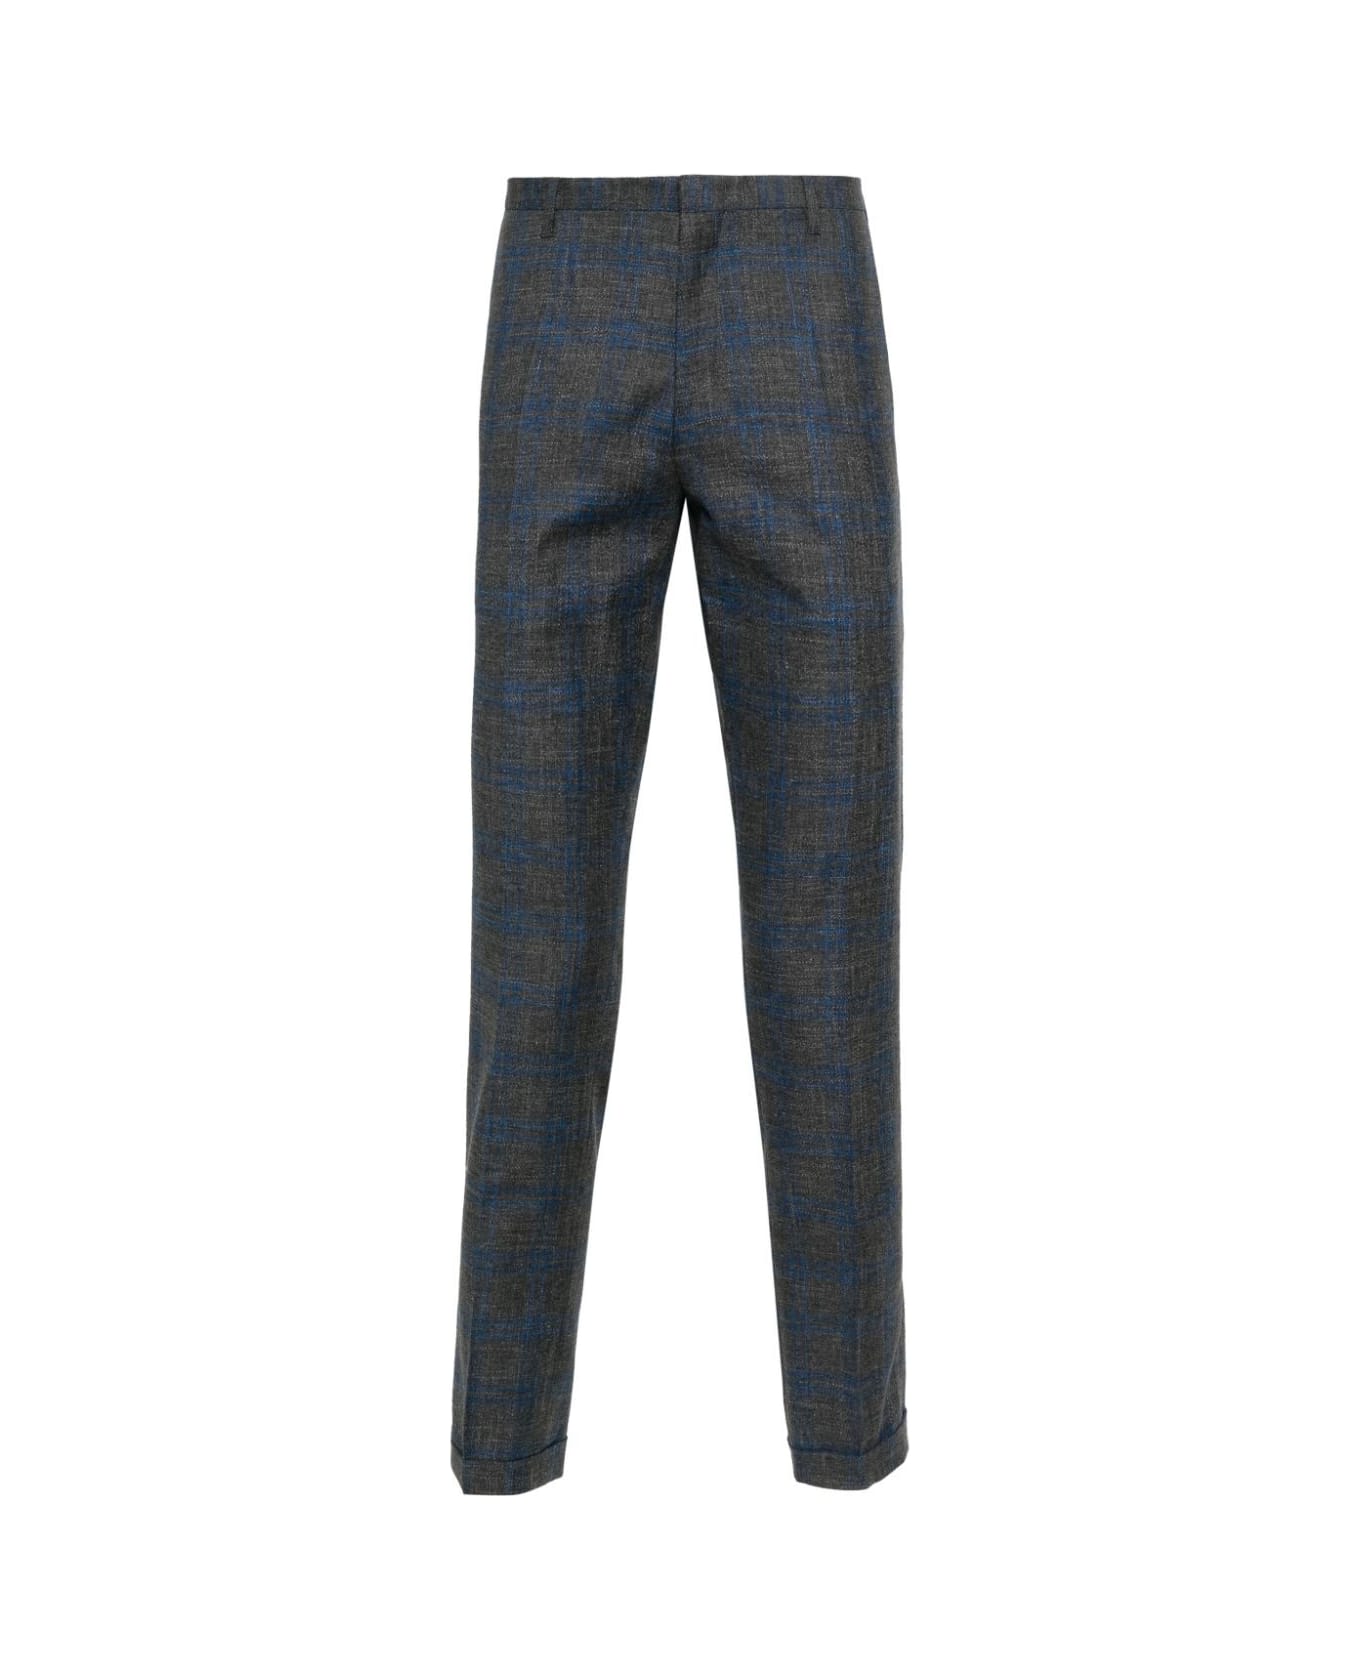 Paul Smith Mens Trousers - Anthracite